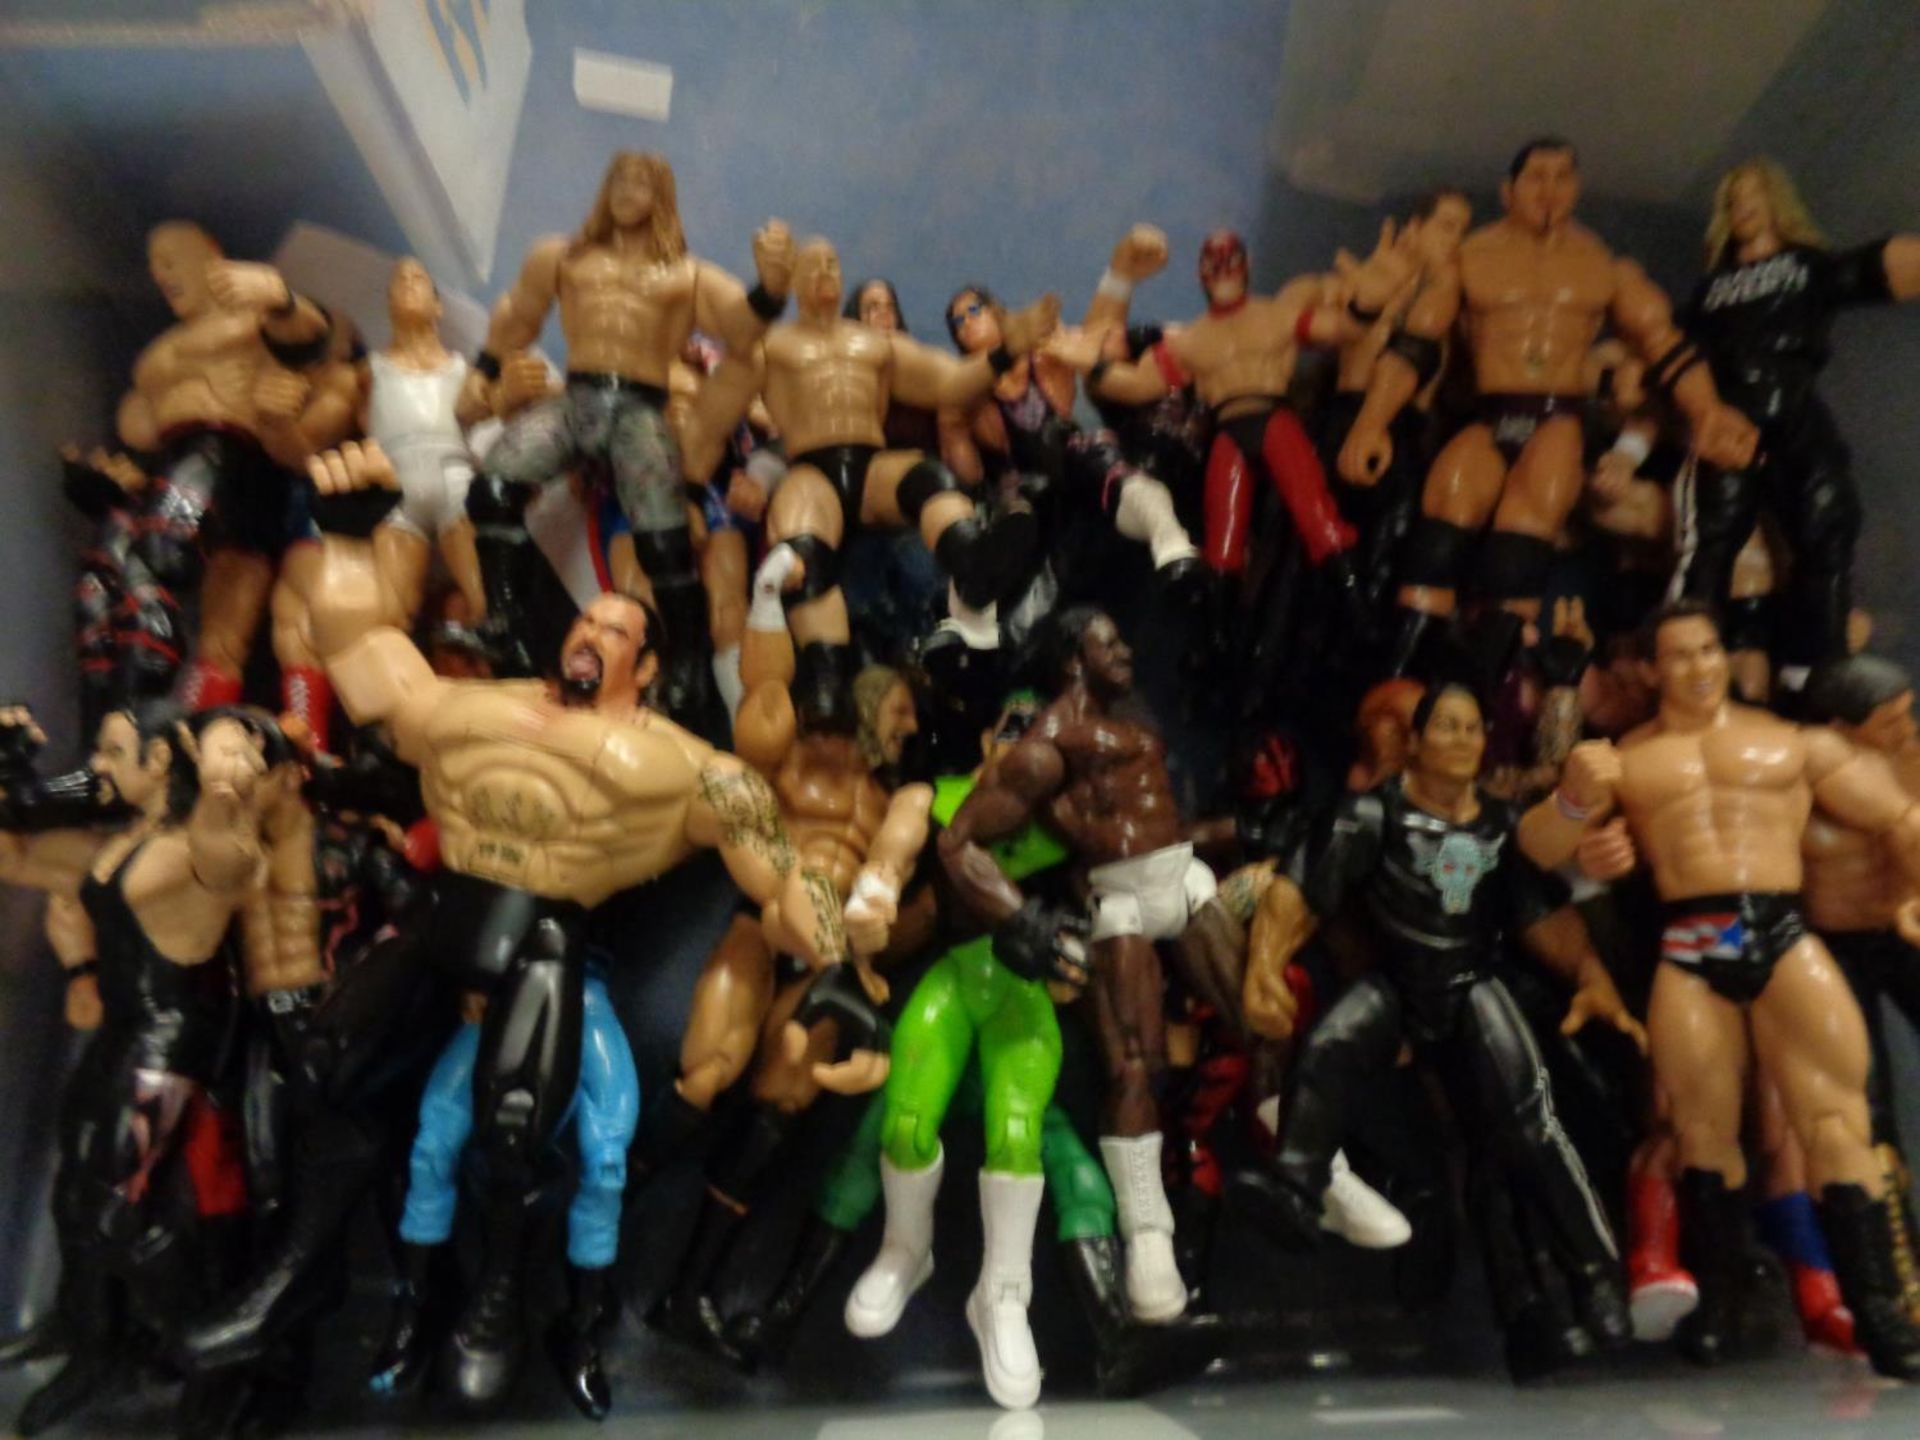 A WWF WRESTLING RING AND A LARGE AMOUNT OF WWF FIGURINES - Image 2 of 4